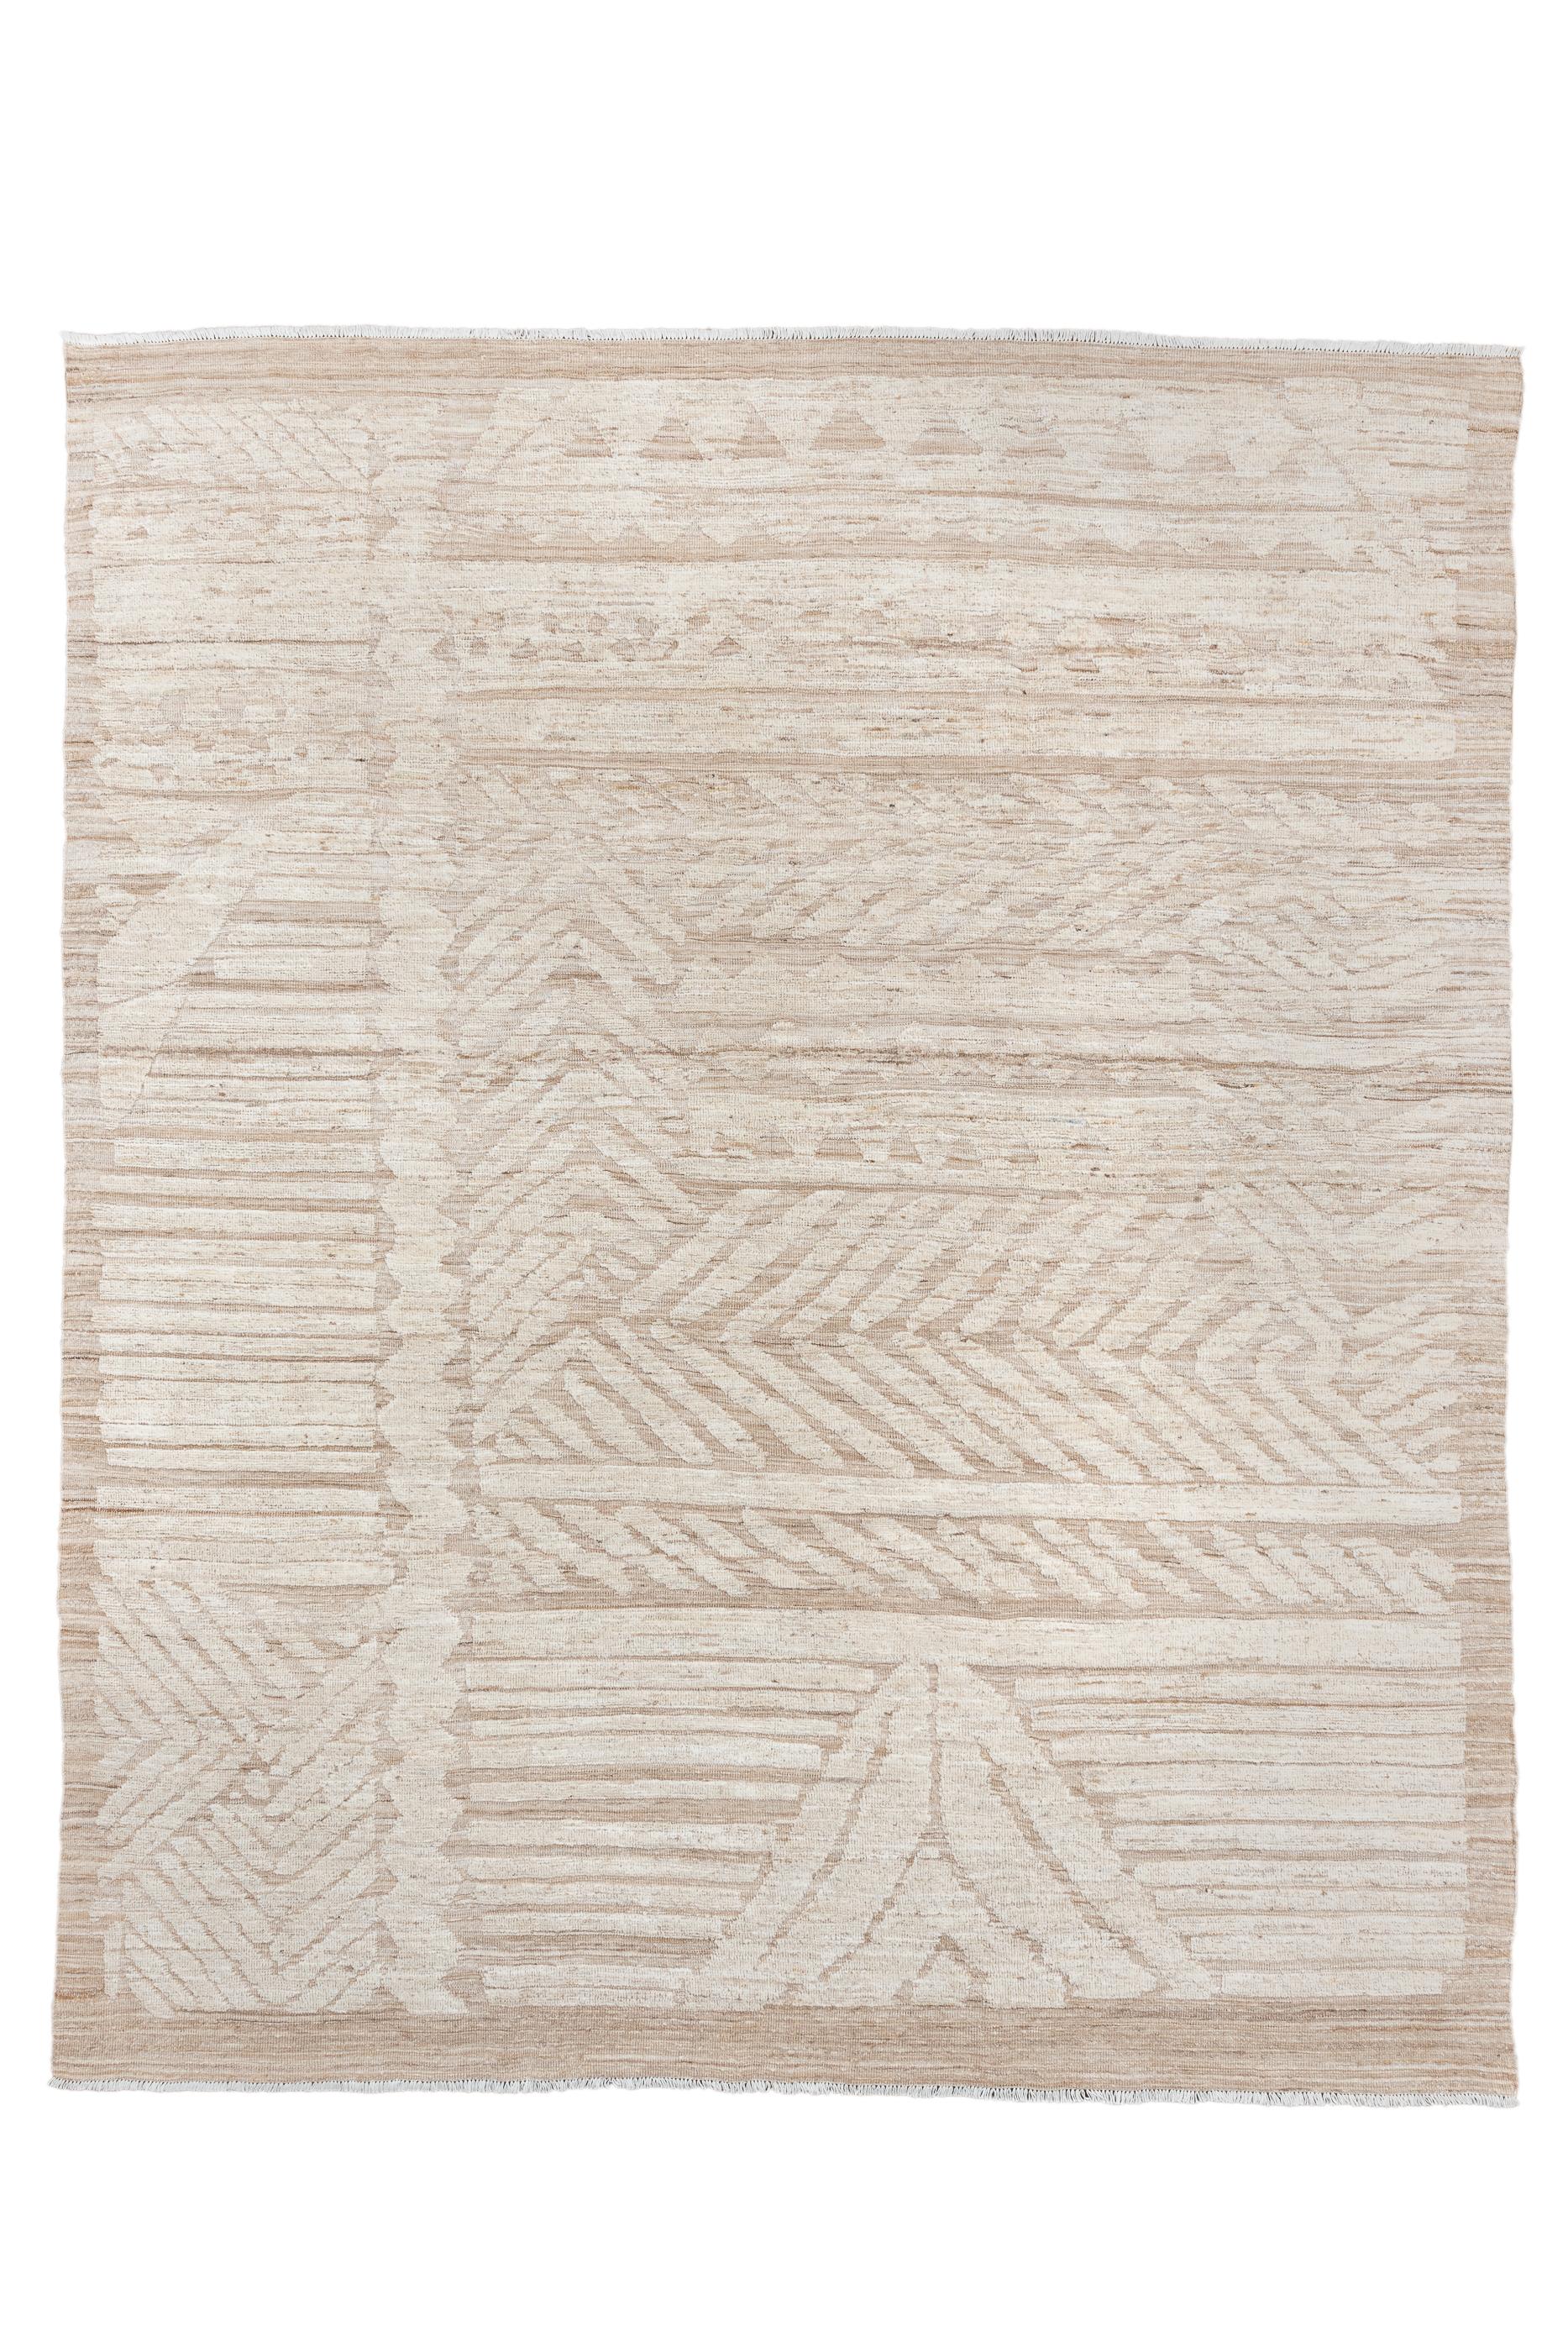 This village piece in cream and light brown asymmetrically combines panels of stripes, chevrons, diagonal bars, plain strips and a large nested triangular basal motif into an attractive, abstract whole.  Abrashed, irregular plain light brown border.